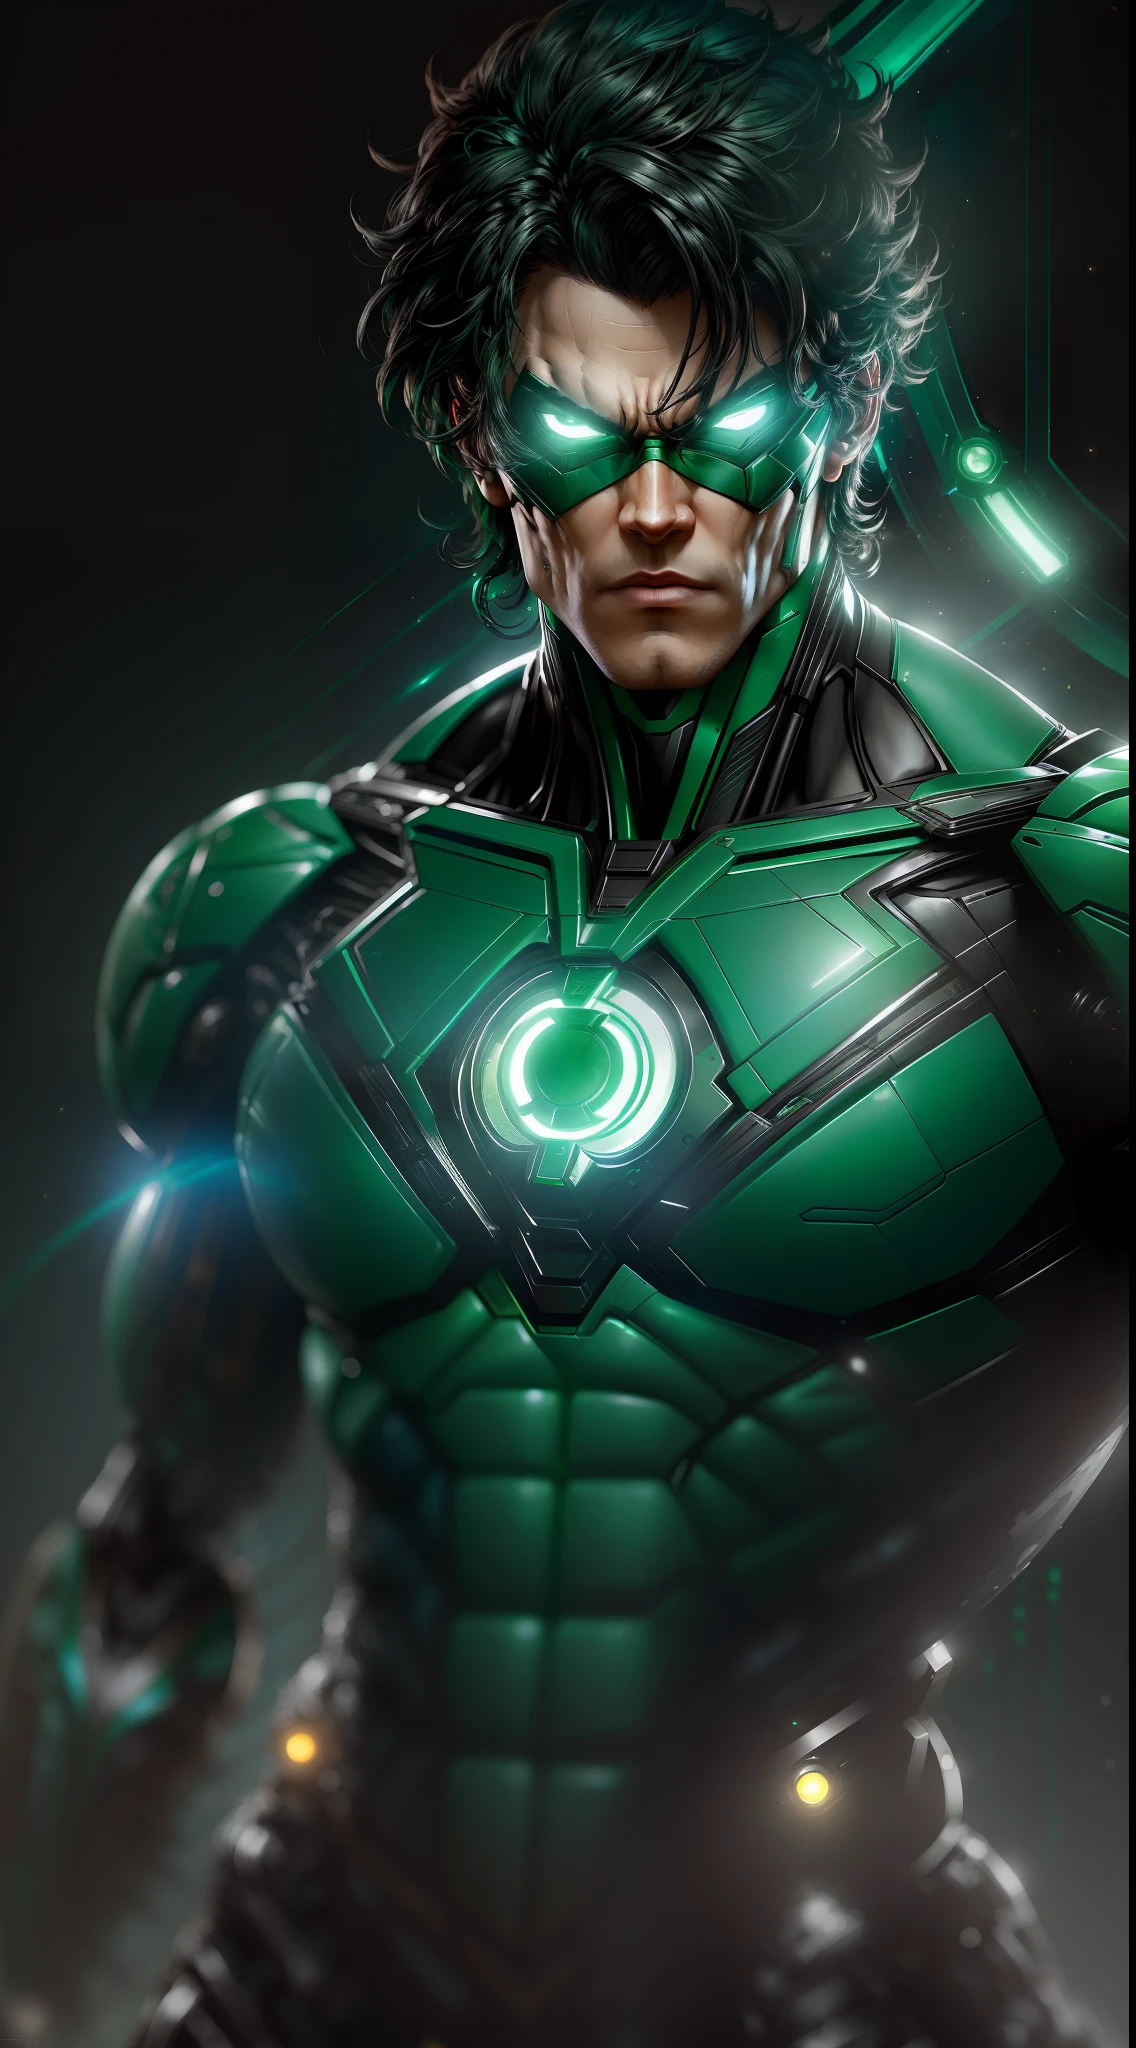 Nightwing Green Lantern from DC photography, biomechanical, complex robot, full growth, hyper-realistic, insane fine details, extremely clean lines, cyberpunk aesthetic, a masterpiece featured at Zbrush Central